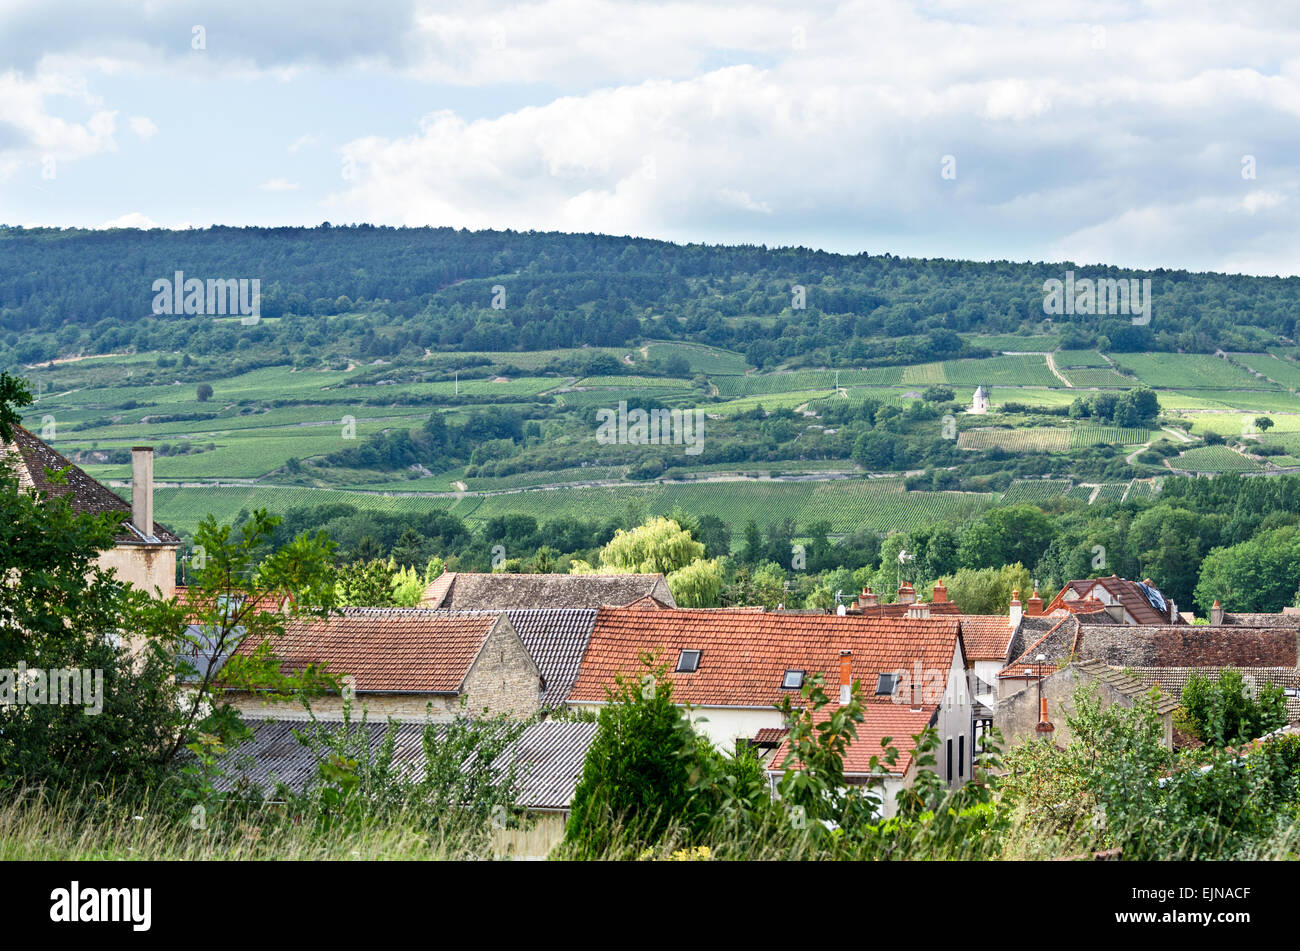 Looking over the terracotta-tiled roofs of Remigny, France, to the vineyards surrounding the Moulin de Santenay. Stock Photo